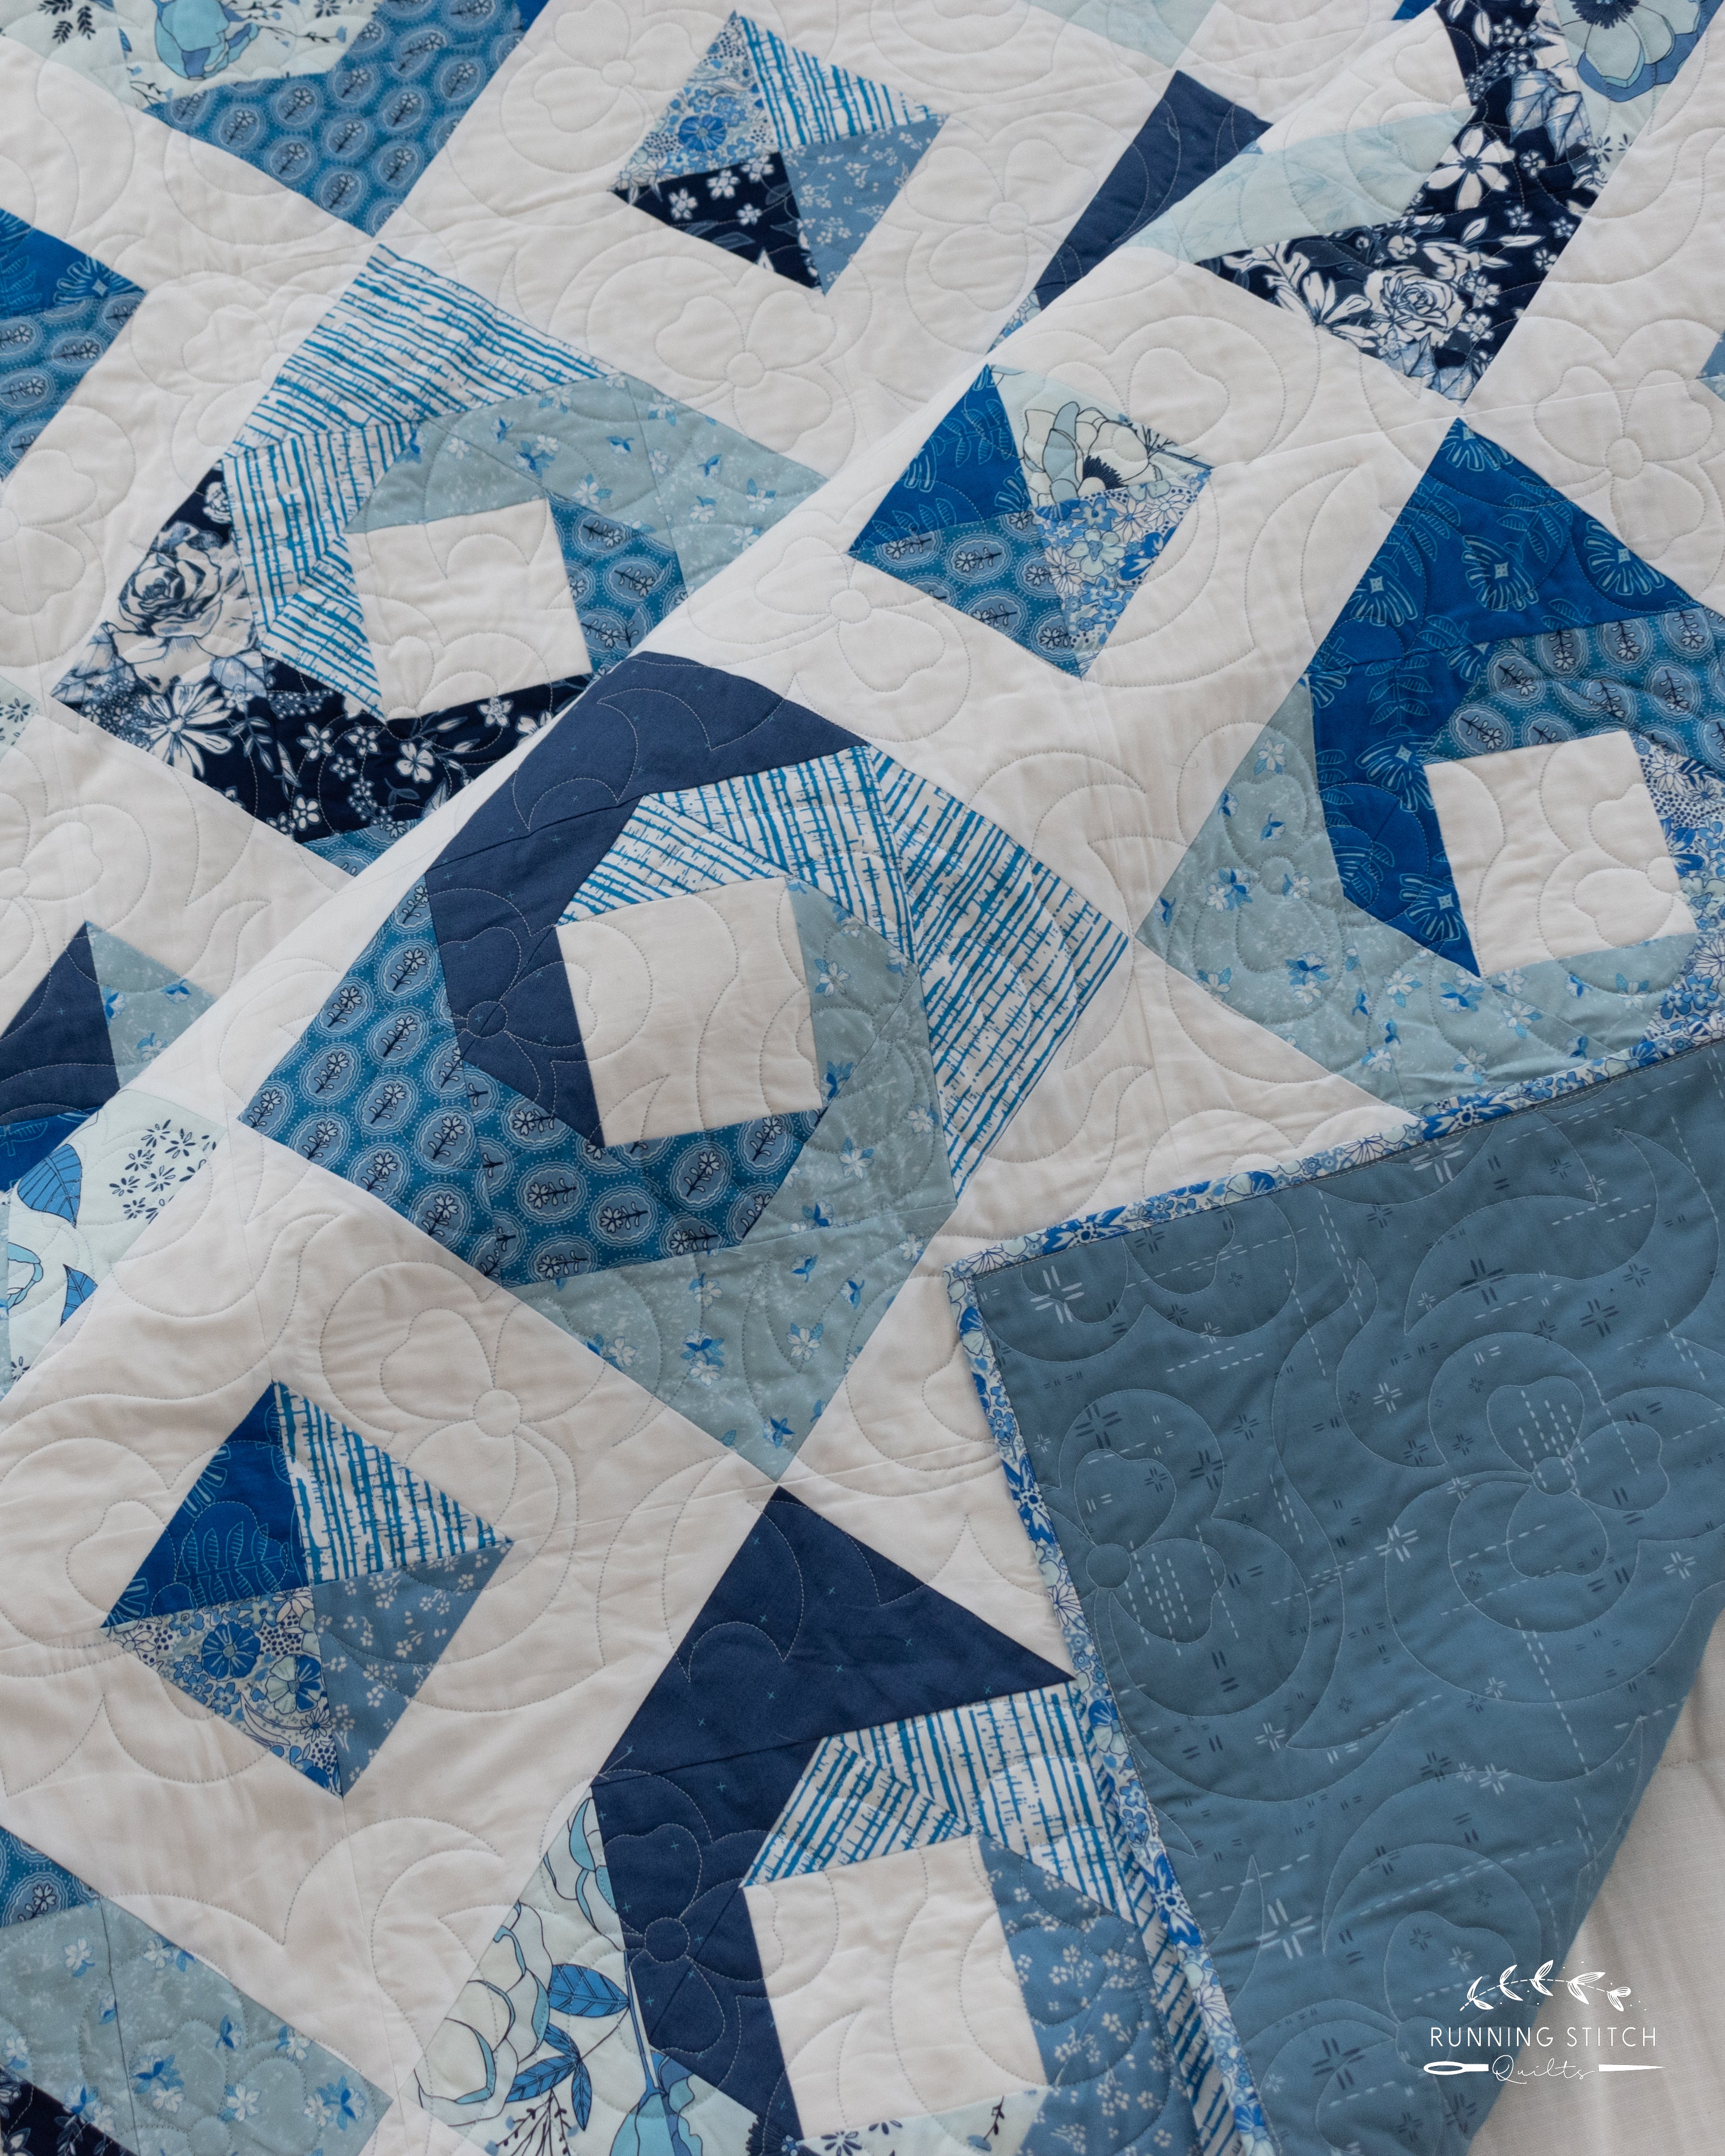 Hurrication - The True Blue One - Running Stitch Quilts